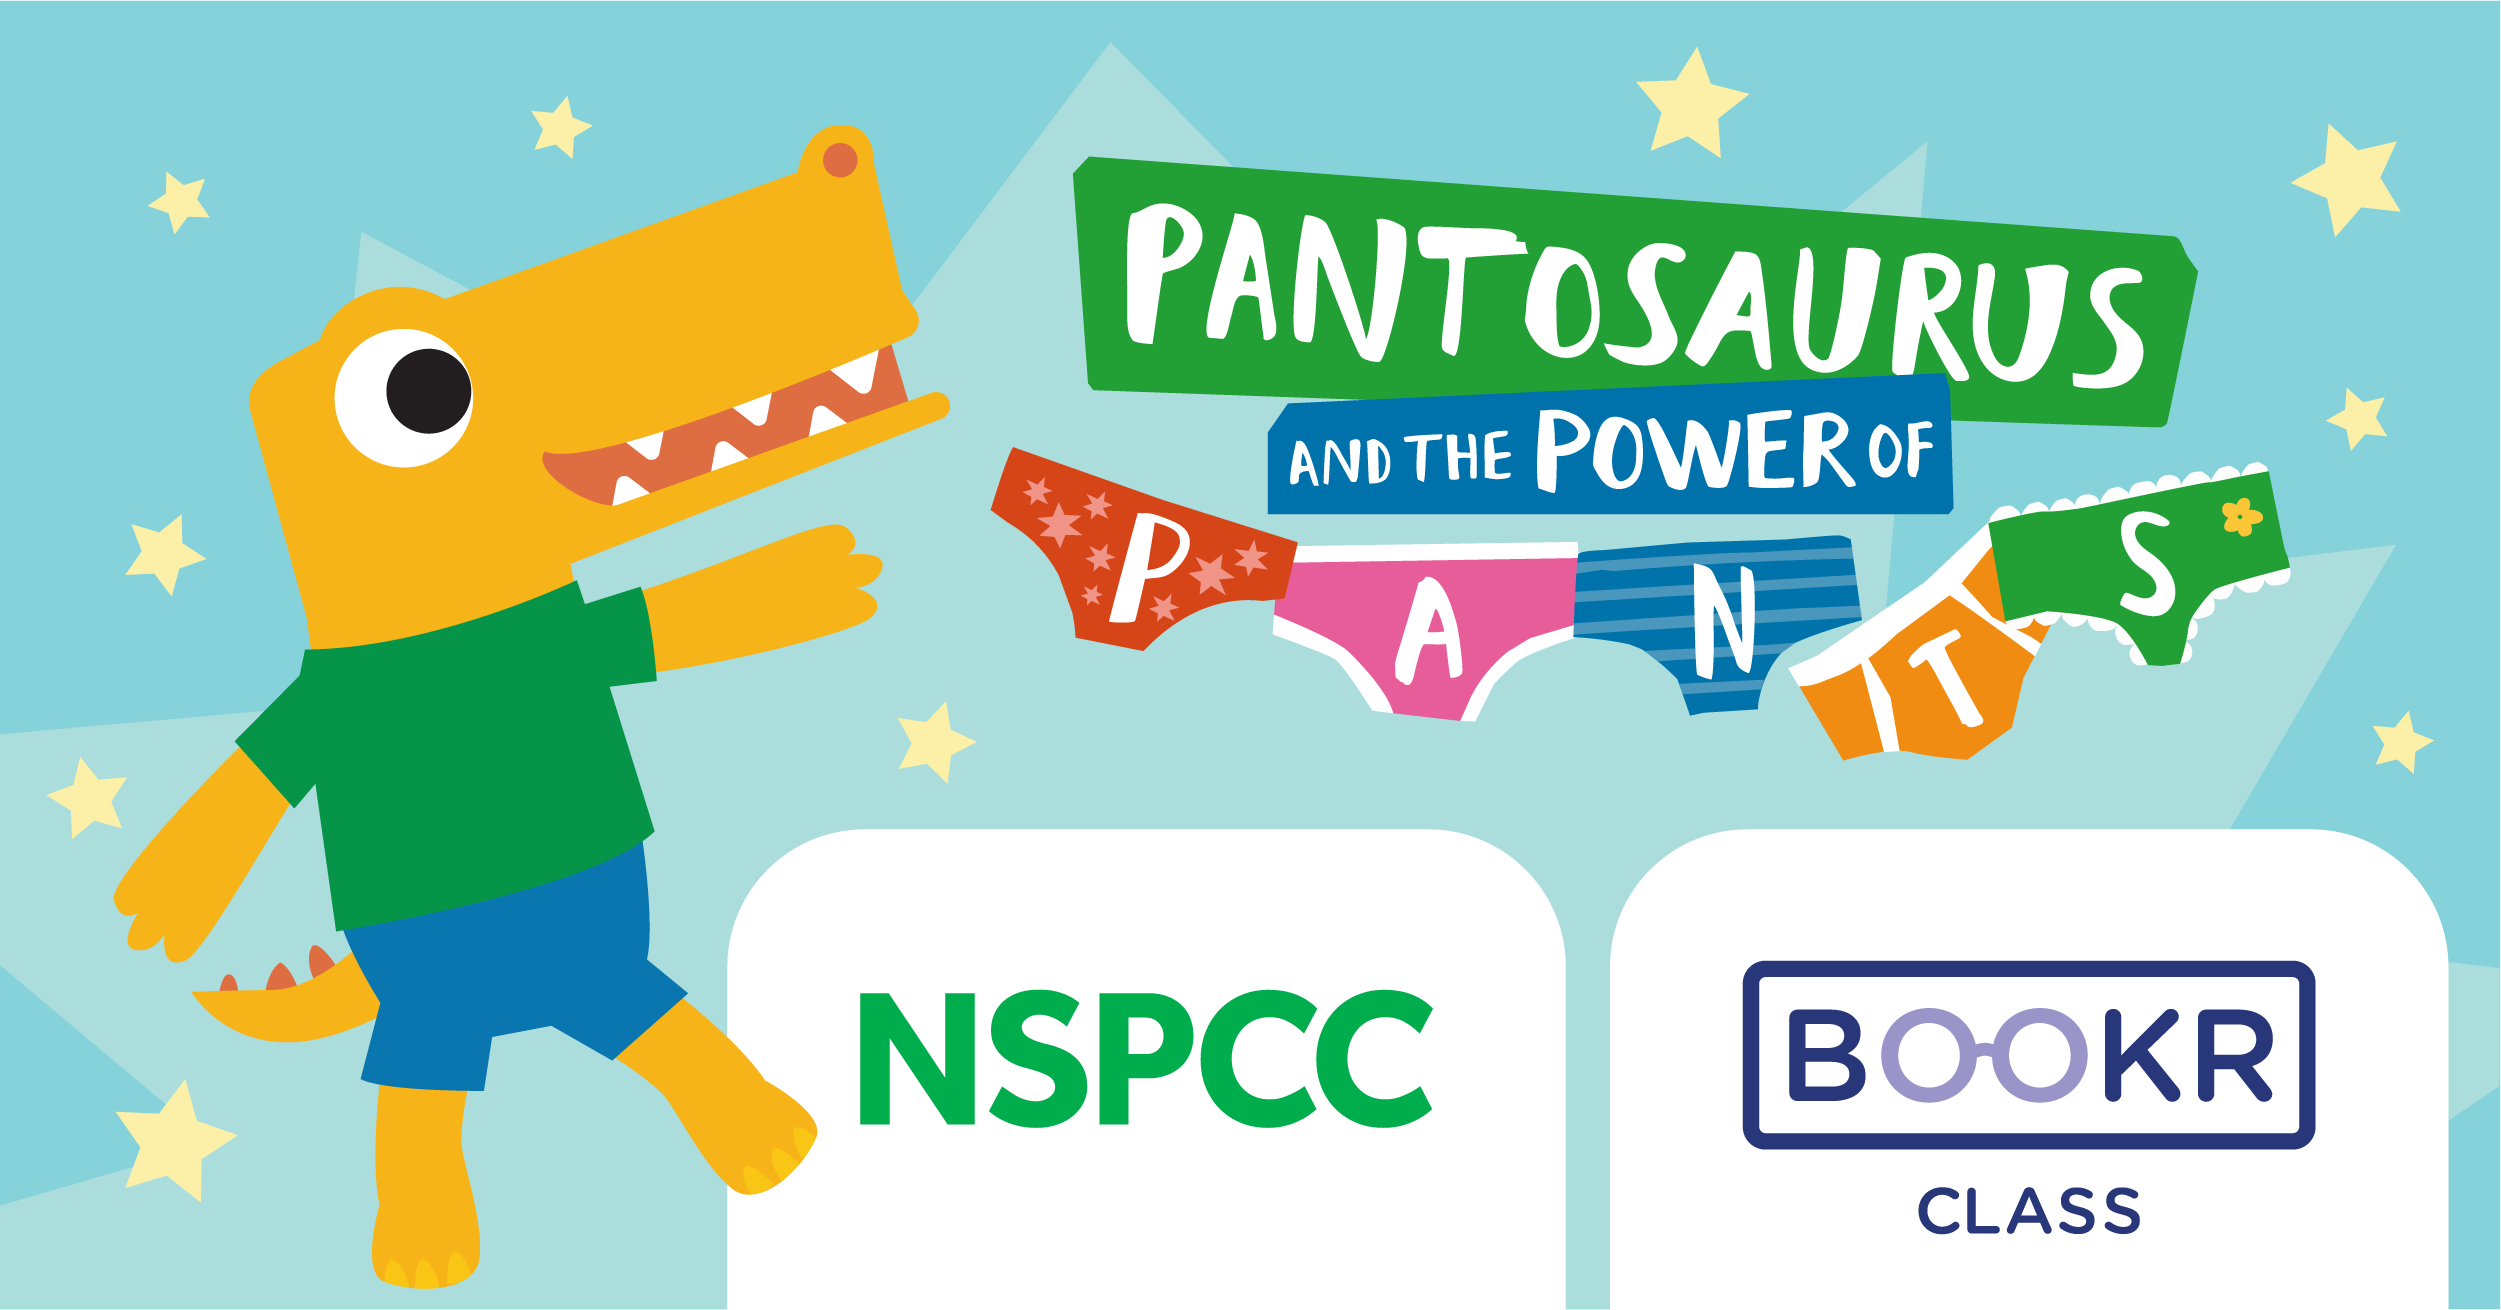 The NSPCC’s Pantosaurus and the POWER of PANTS story books partners with BookrClass for an interactive ebook